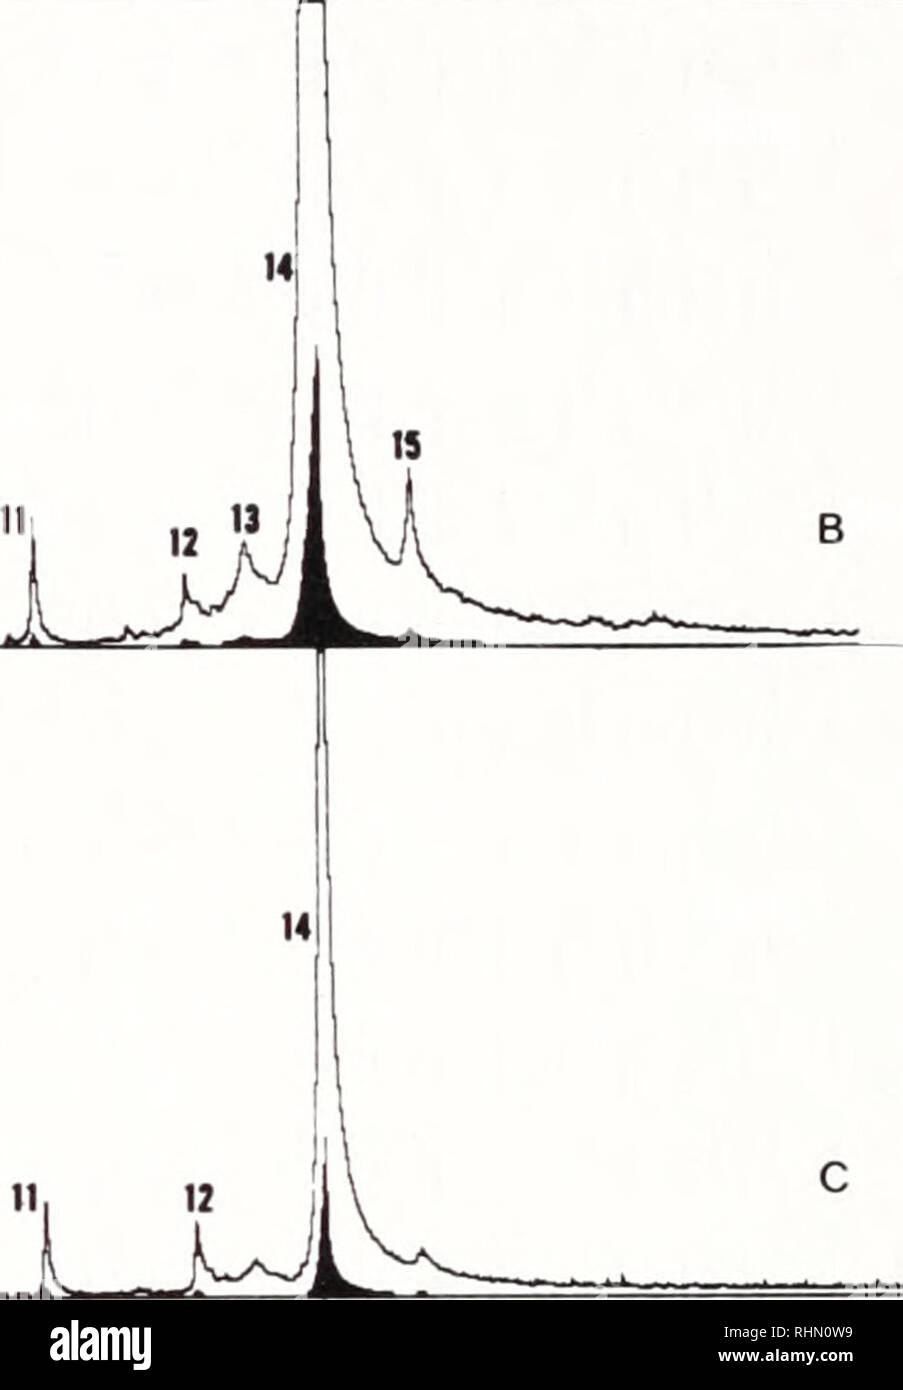 . The Biological bulletin. Biology; Zoology; Biology; Marine Biology. 390 N. H. WILLIAMS AND W. M. WHITTEN o II. Time FIGURE 3, A-C. Total ion chromatograms of the floral fragrance of an orchid and extracts of the bee that pollinates it. A. Total ion chromatogram of the fragrance of Gongora quinquenervis from El Valle de Anton, Panama. B. Total ion chromatogram of hind tibial extract of Euglossa deceptrix, the pollinator of G. quinquenervis at El Valle. C. Total ion chromatogram of the cephalic extract of the same individual bee. Note the sets of compounds shared between A and B and between B  Stock Photo